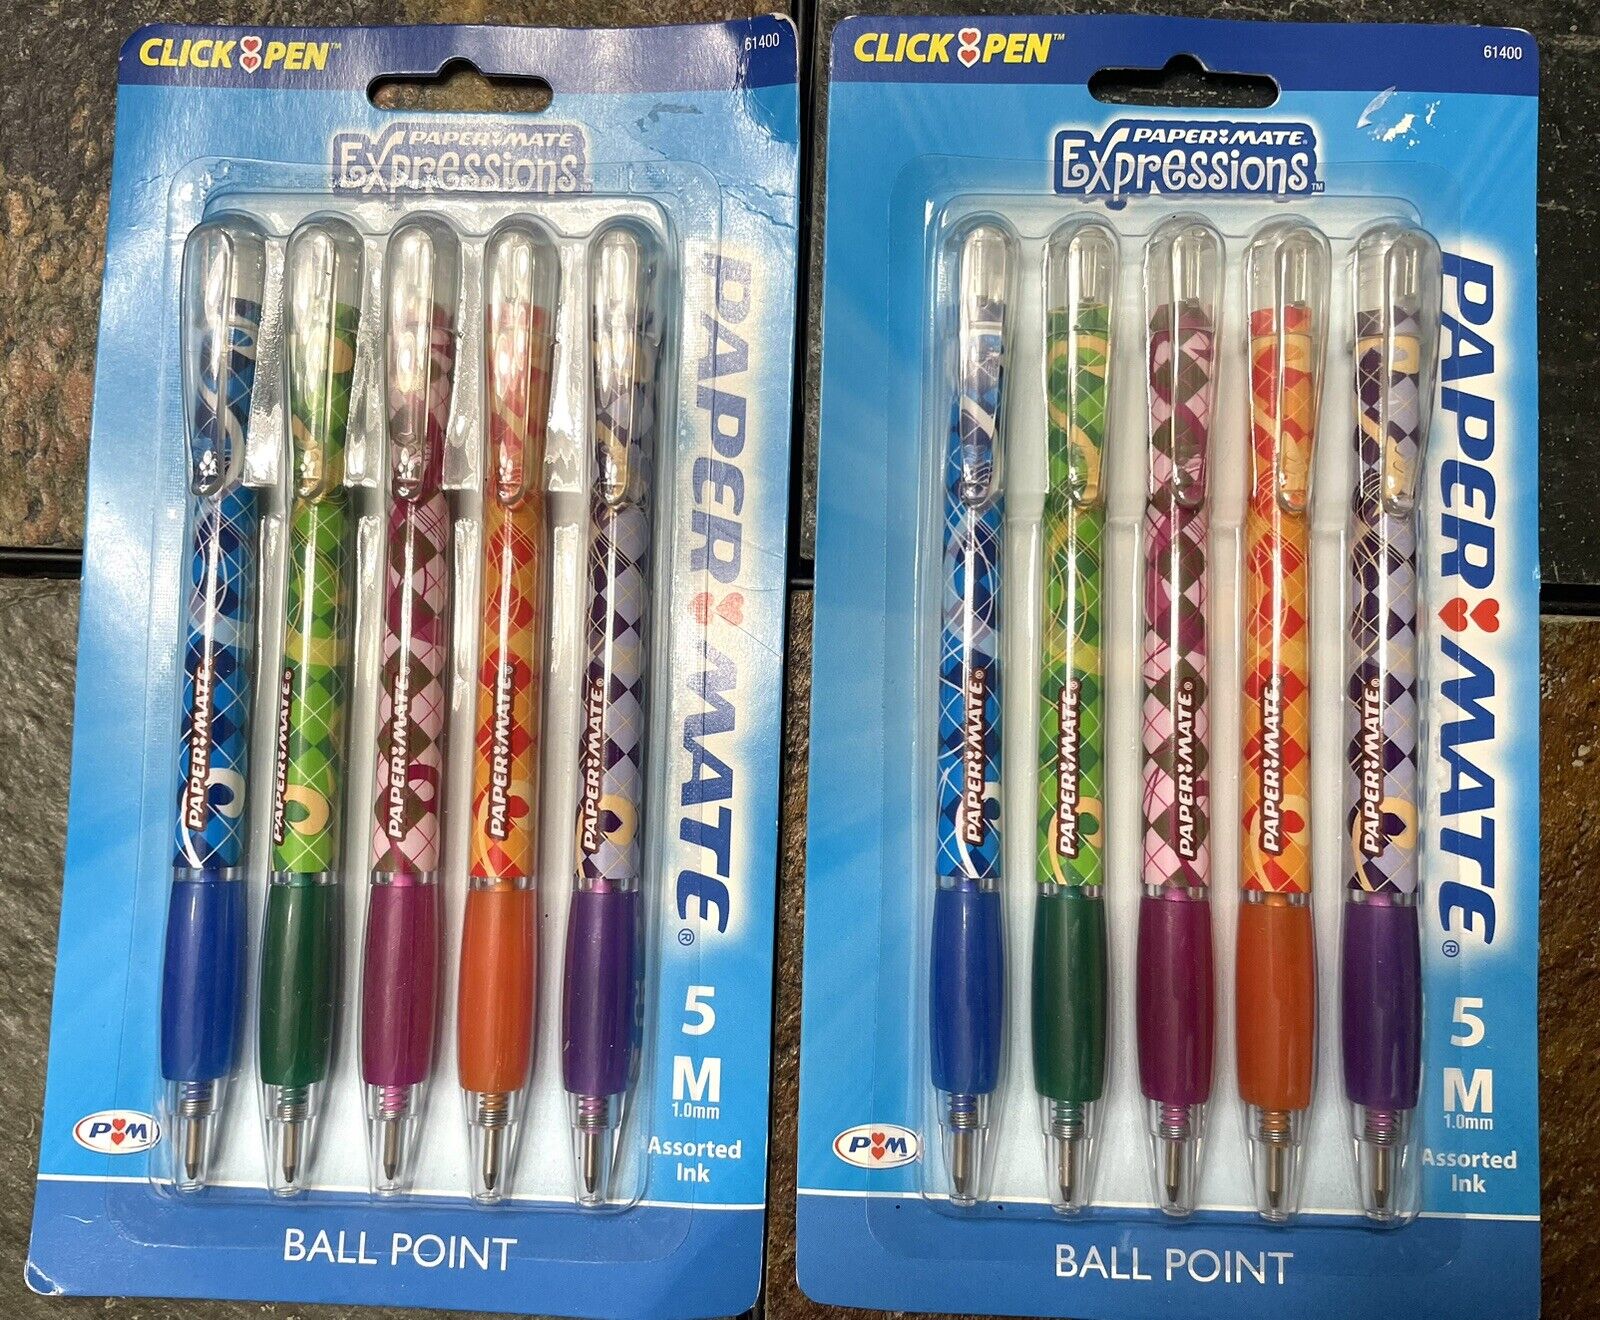 Paper Mate Expressions 10 Total Plaid Ballpoint Ink Pens Med 1 MM Assorted Ink